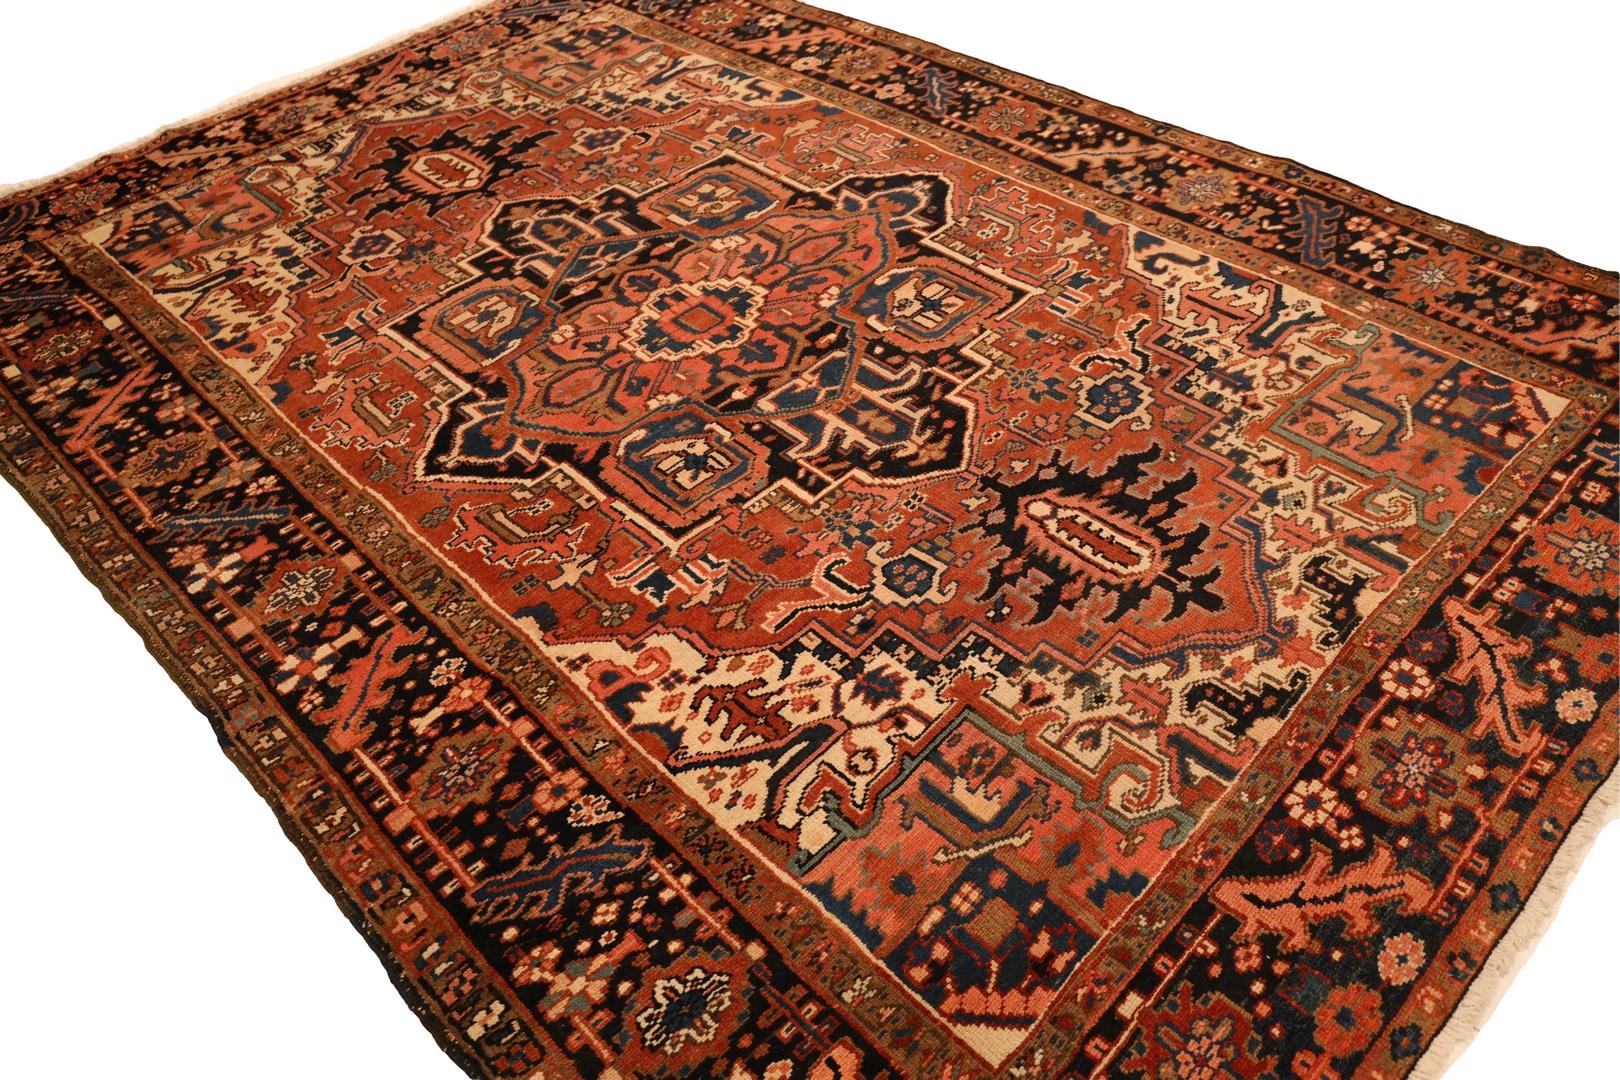 Hand-Knotted Heriz Antique Rug - 7'1